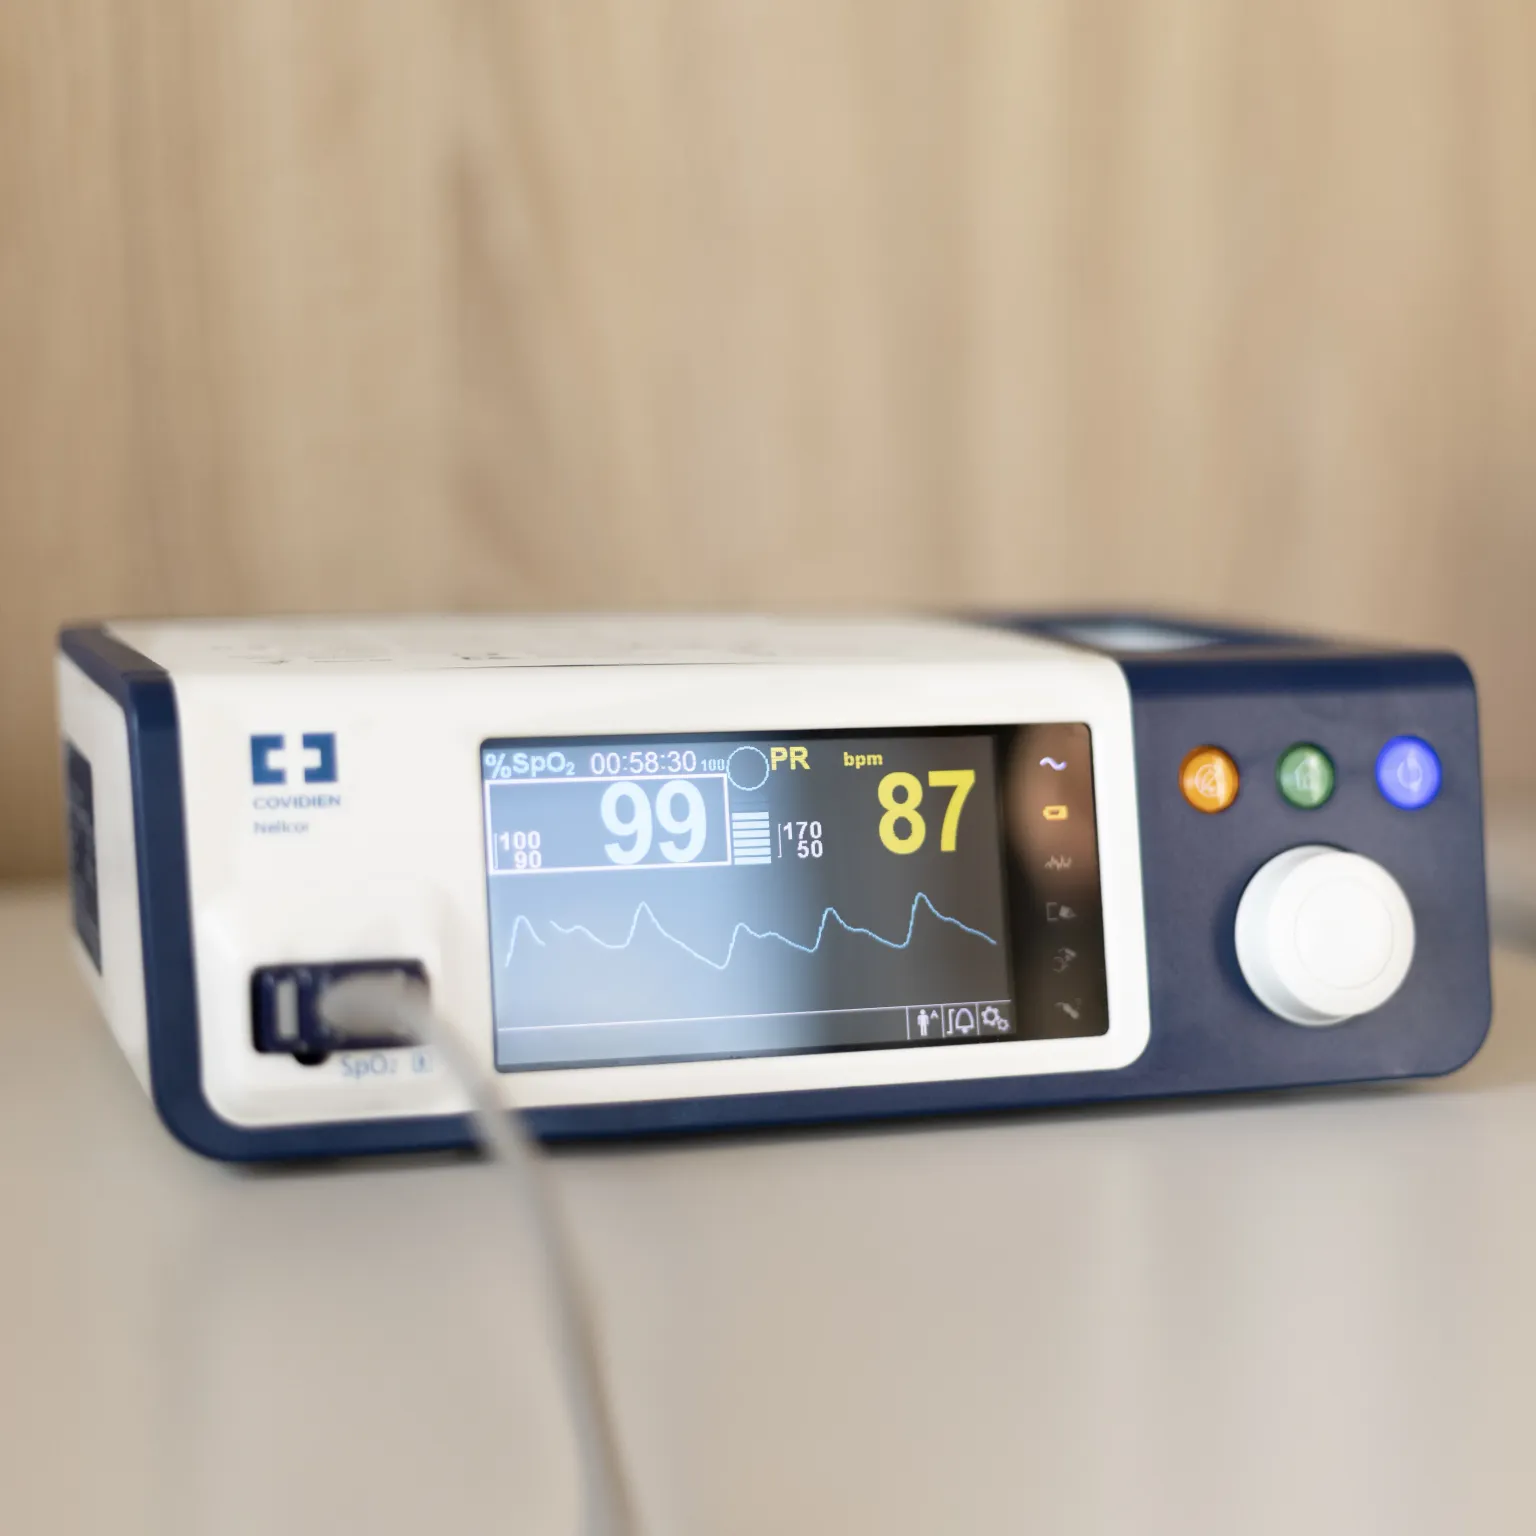 Monitor for monitoring the patient's well-being